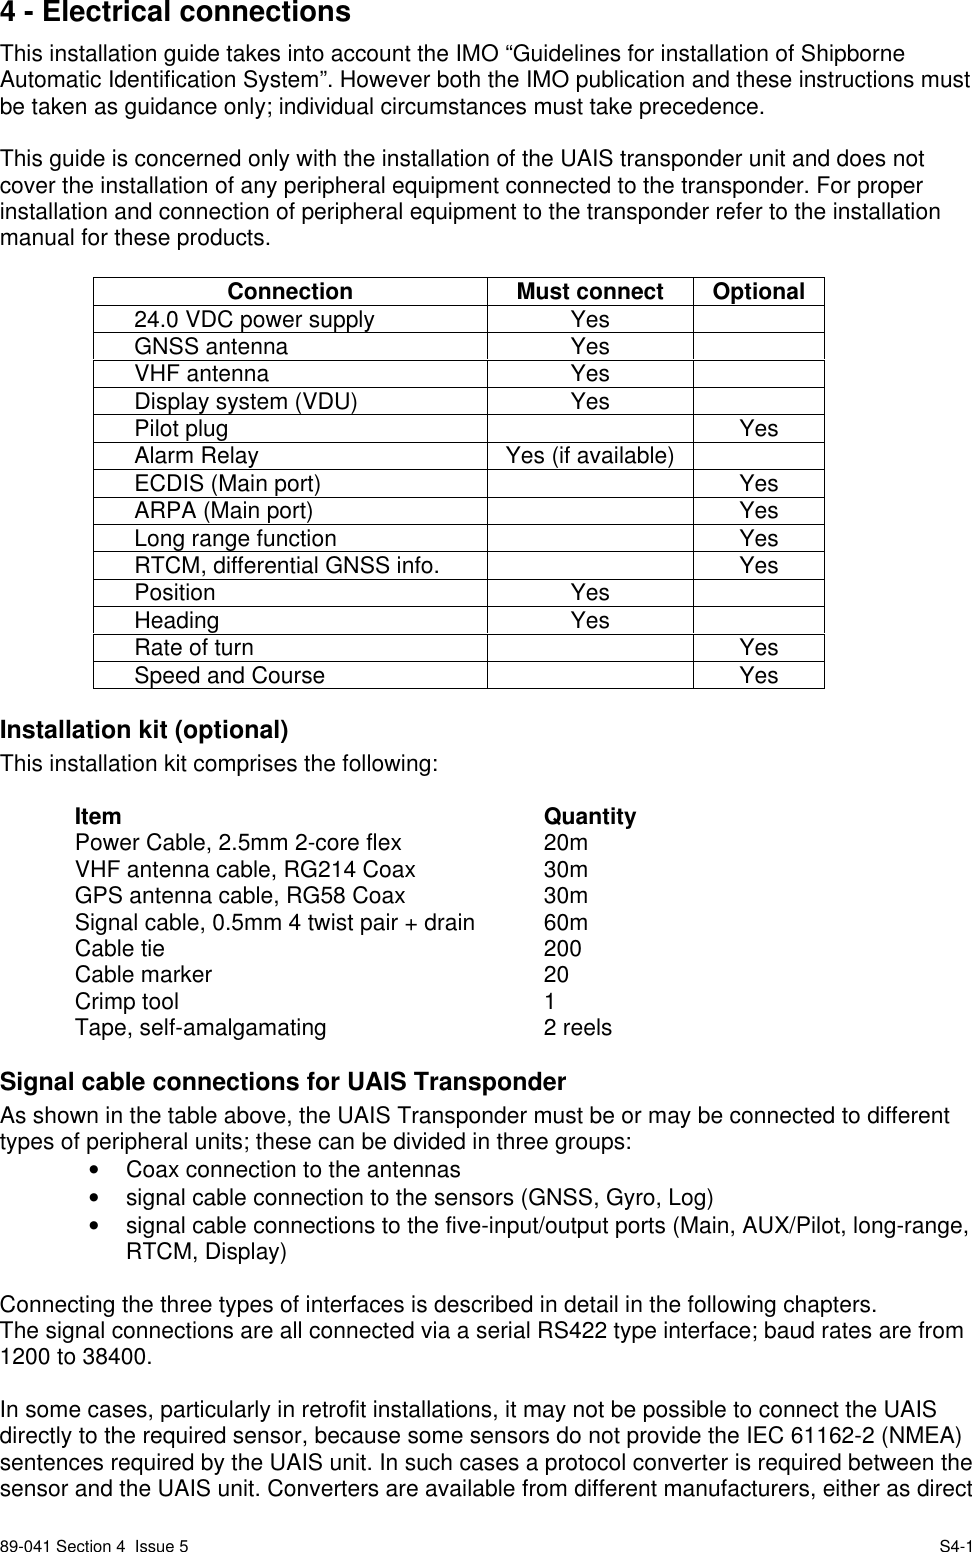 89-041 Section 4  Issue 5 S4-14 - Electrical connectionsThis installation guide takes into account the IMO “Guidelines for installation of ShipborneAutomatic Identification System”. However both the IMO publication and these instructions mustbe taken as guidance only; individual circumstances must take precedence.This guide is concerned only with the installation of the UAIS transponder unit and does notcover the installation of any peripheral equipment connected to the transponder. For properinstallation and connection of peripheral equipment to the transponder refer to the installationmanual for these products.Connection Must connect Optional24.0 VDC power supply YesGNSS antenna YesVHF antenna YesDisplay system (VDU) YesPilot plug YesAlarm Relay Yes (if available)ECDIS (Main port) YesARPA (Main port) YesLong range function YesRTCM, differential GNSS info. YesPosition YesHeading YesRate of turn YesSpeed and Course YesInstallation kit (optional)This installation kit comprises the following:Item QuantityPower Cable, 2.5mm 2-core flex 20mVHF antenna cable, RG214 Coax 30mGPS antenna cable, RG58 Coax 30mSignal cable, 0.5mm 4 twist pair + drain 60mCable tie 200Cable marker 20Crimp tool 1Tape, self-amalgamating 2 reelsSignal cable connections for UAIS TransponderAs shown in the table above, the UAIS Transponder must be or may be connected to differenttypes of peripheral units; these can be divided in three groups:•  Coax connection to the antennas•  signal cable connection to the sensors (GNSS, Gyro, Log)•  signal cable connections to the five-input/output ports (Main, AUX/Pilot, long-range,RTCM, Display)Connecting the three types of interfaces is described in detail in the following chapters.The signal connections are all connected via a serial RS422 type interface; baud rates are from1200 to 38400.In some cases, particularly in retrofit installations, it may not be possible to connect the UAISdirectly to the required sensor, because some sensors do not provide the IEC 61162-2 (NMEA)sentences required by the UAIS unit. In such cases a protocol converter is required between thesensor and the UAIS unit. Converters are available from different manufacturers, either as direct